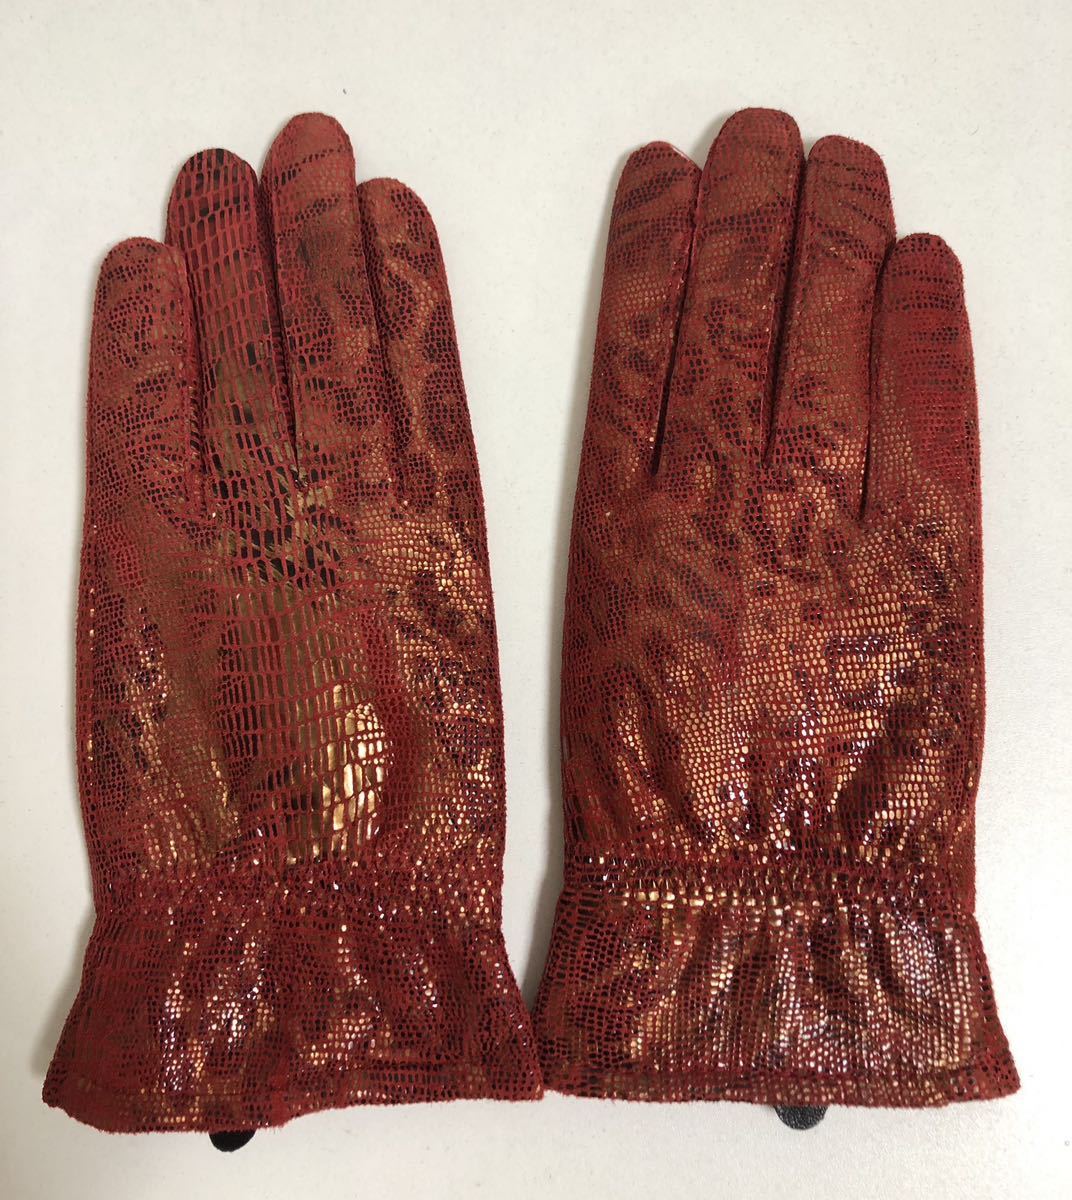 * free shipping * new goods * leather gloves lady's * leather glove reverse side nappy type pushed . Kirakira red group 